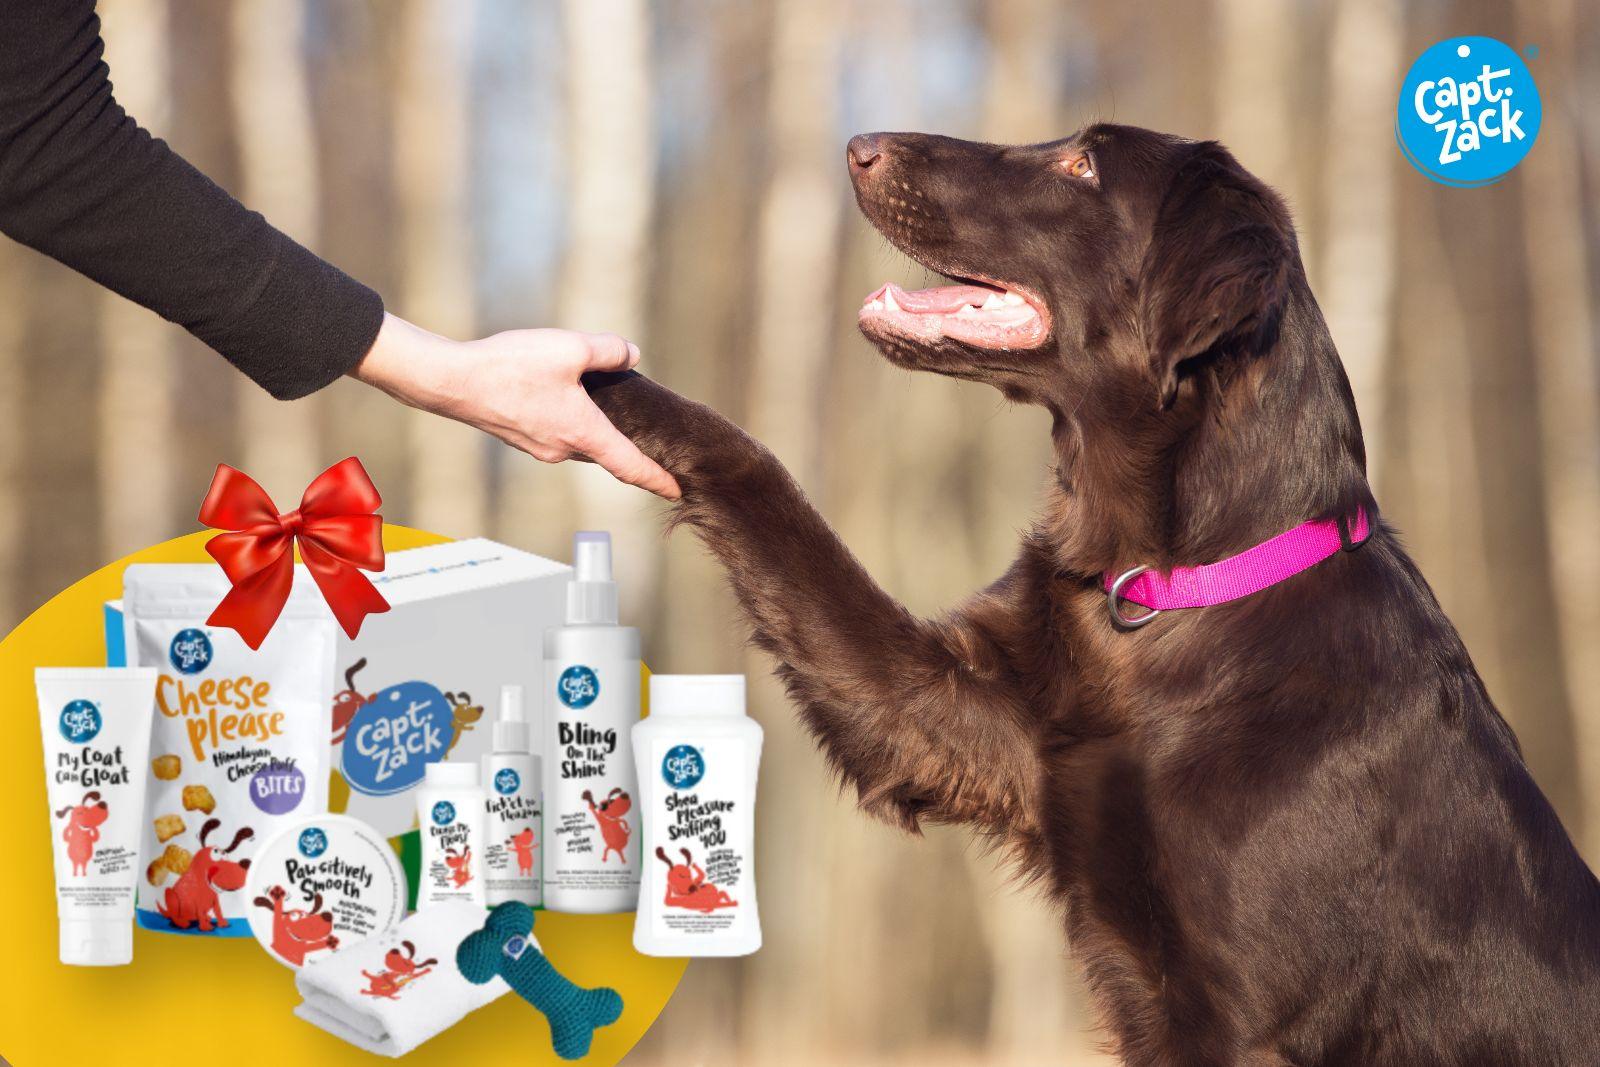 Best Gifts For Your Dog - Captain Zack